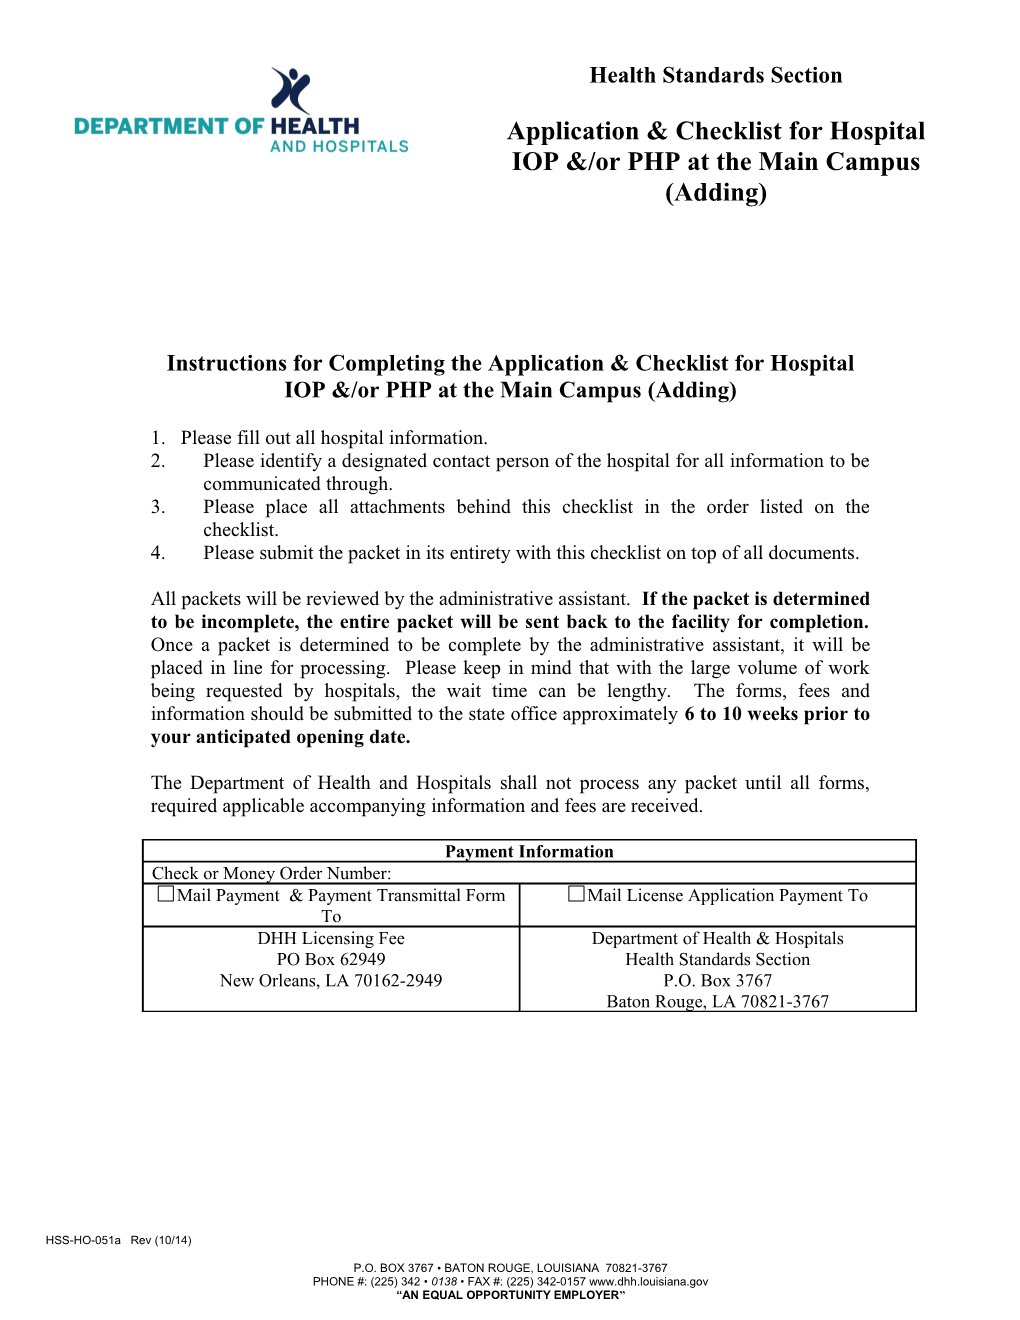 Application & Checklist for Hospital IOP &/Or PHP at the Main Campus (Adding)